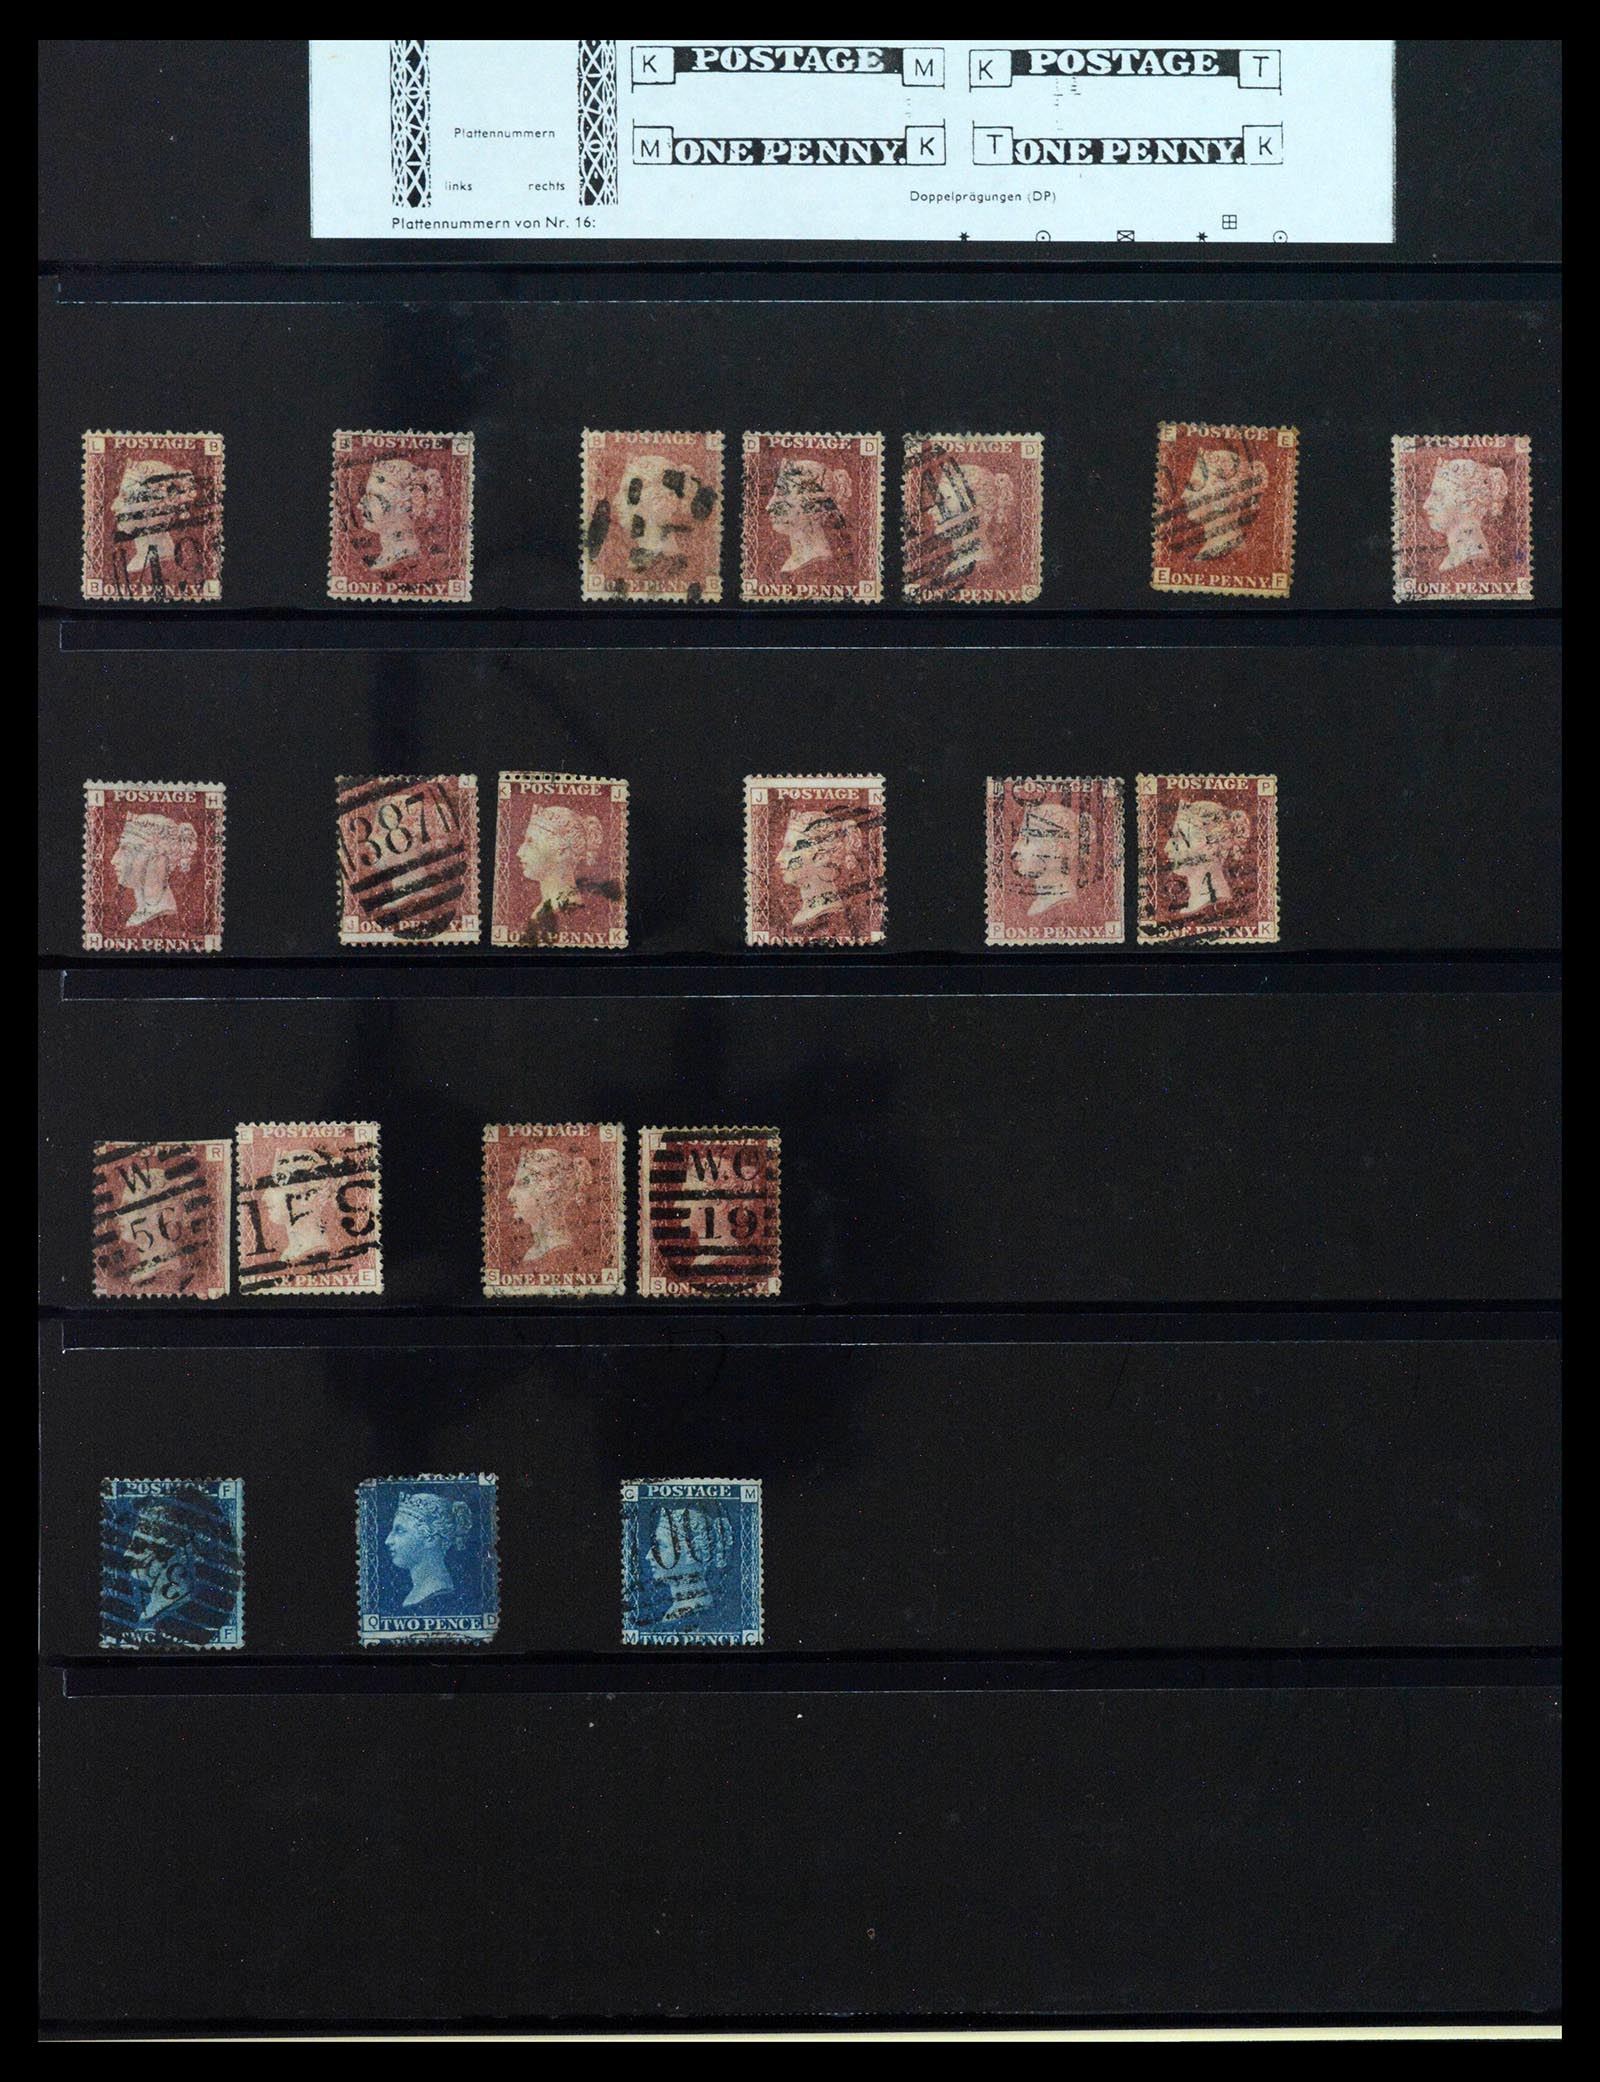 39375 0009 - Stamp collection 39375 Great Britain super collection 1840-1980.